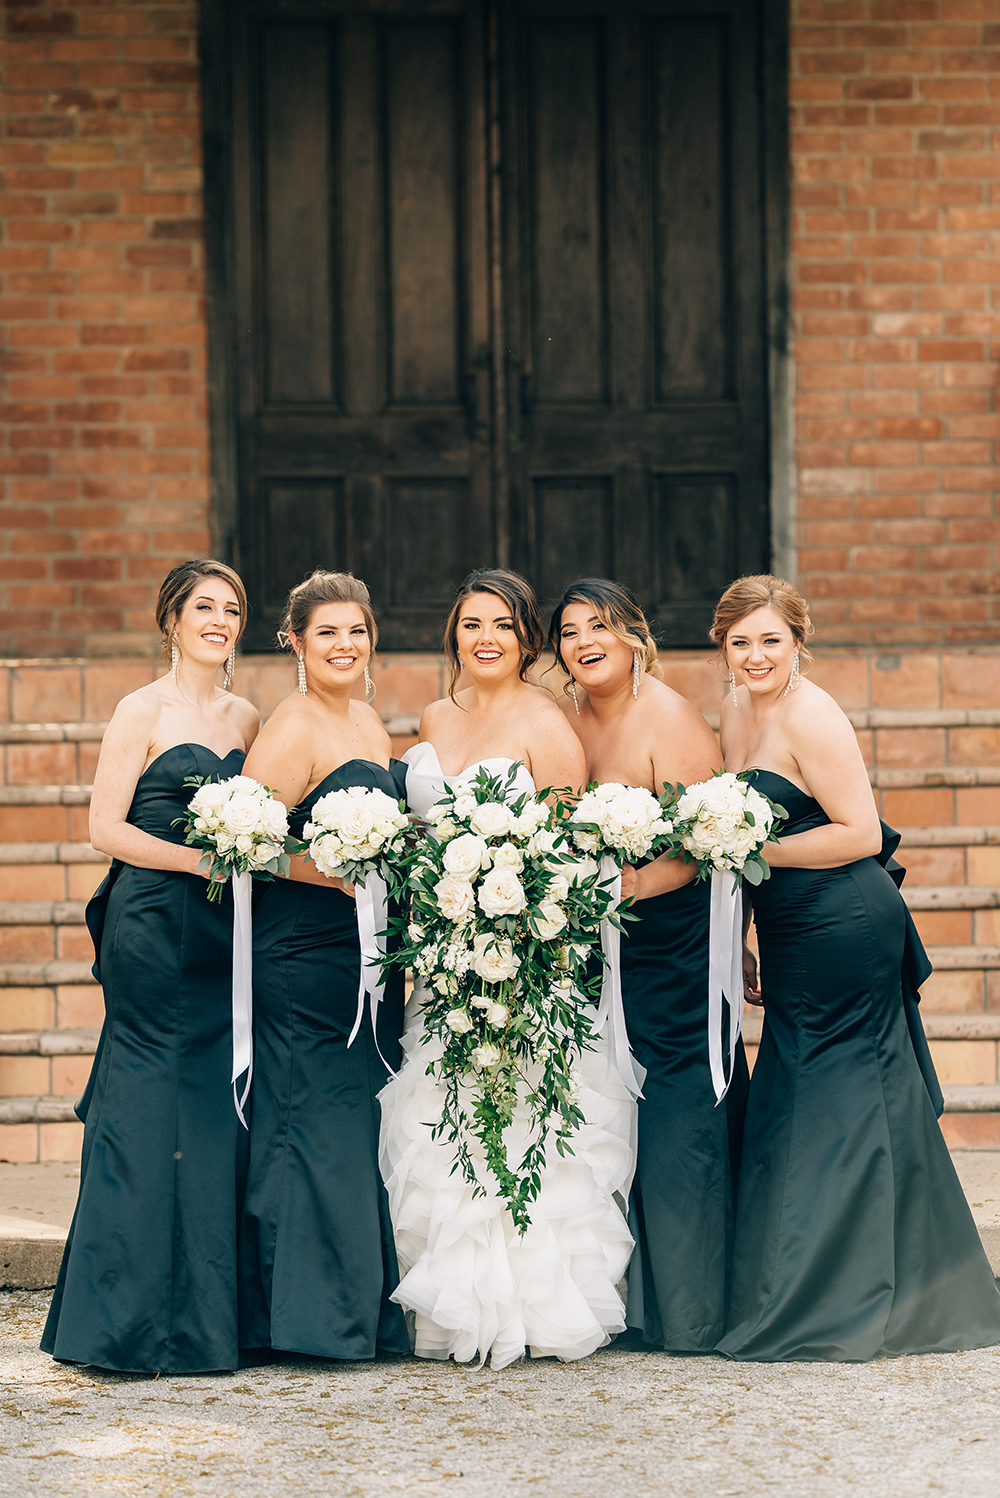 outdoor wedding, bridesmaids, flowers, bouquet, black dresses, black and white wedding, the gallery